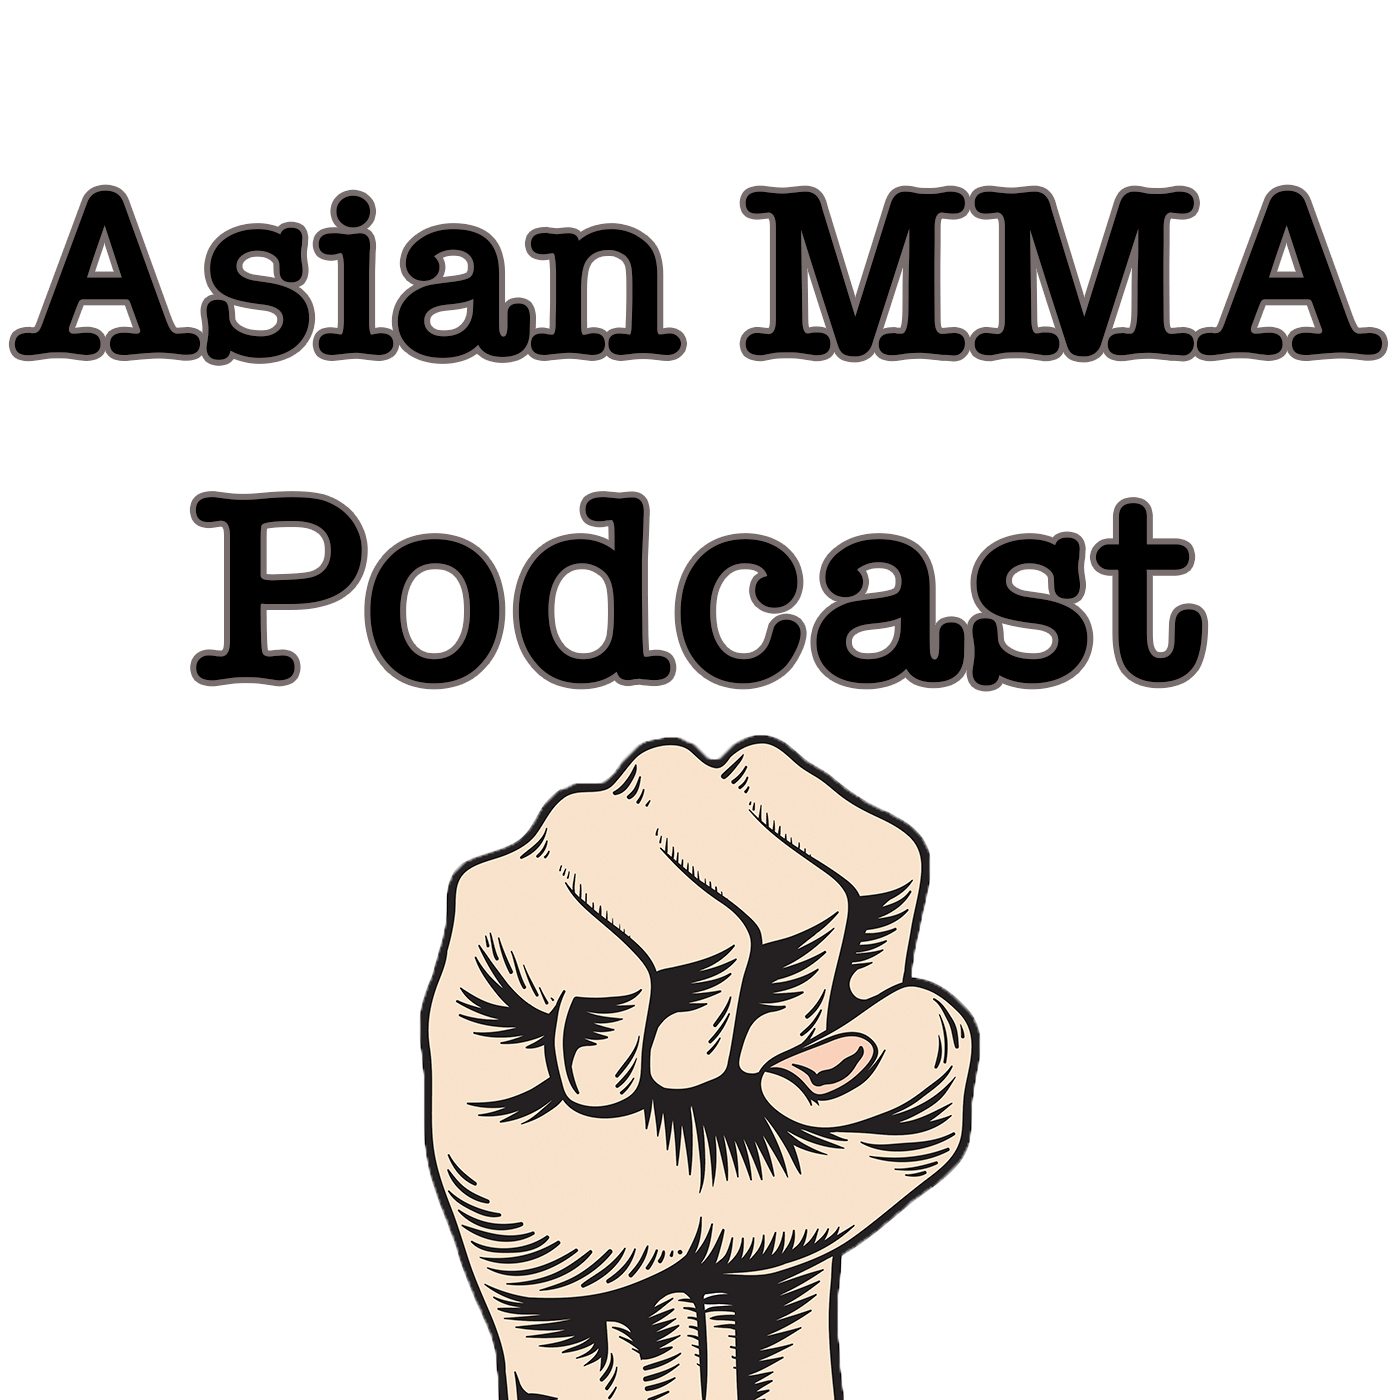 Asian MMA Podcast  weekend update for May 17tth -19th of 2019 ONE Championship Enter the Dragon and ROAD FC 53